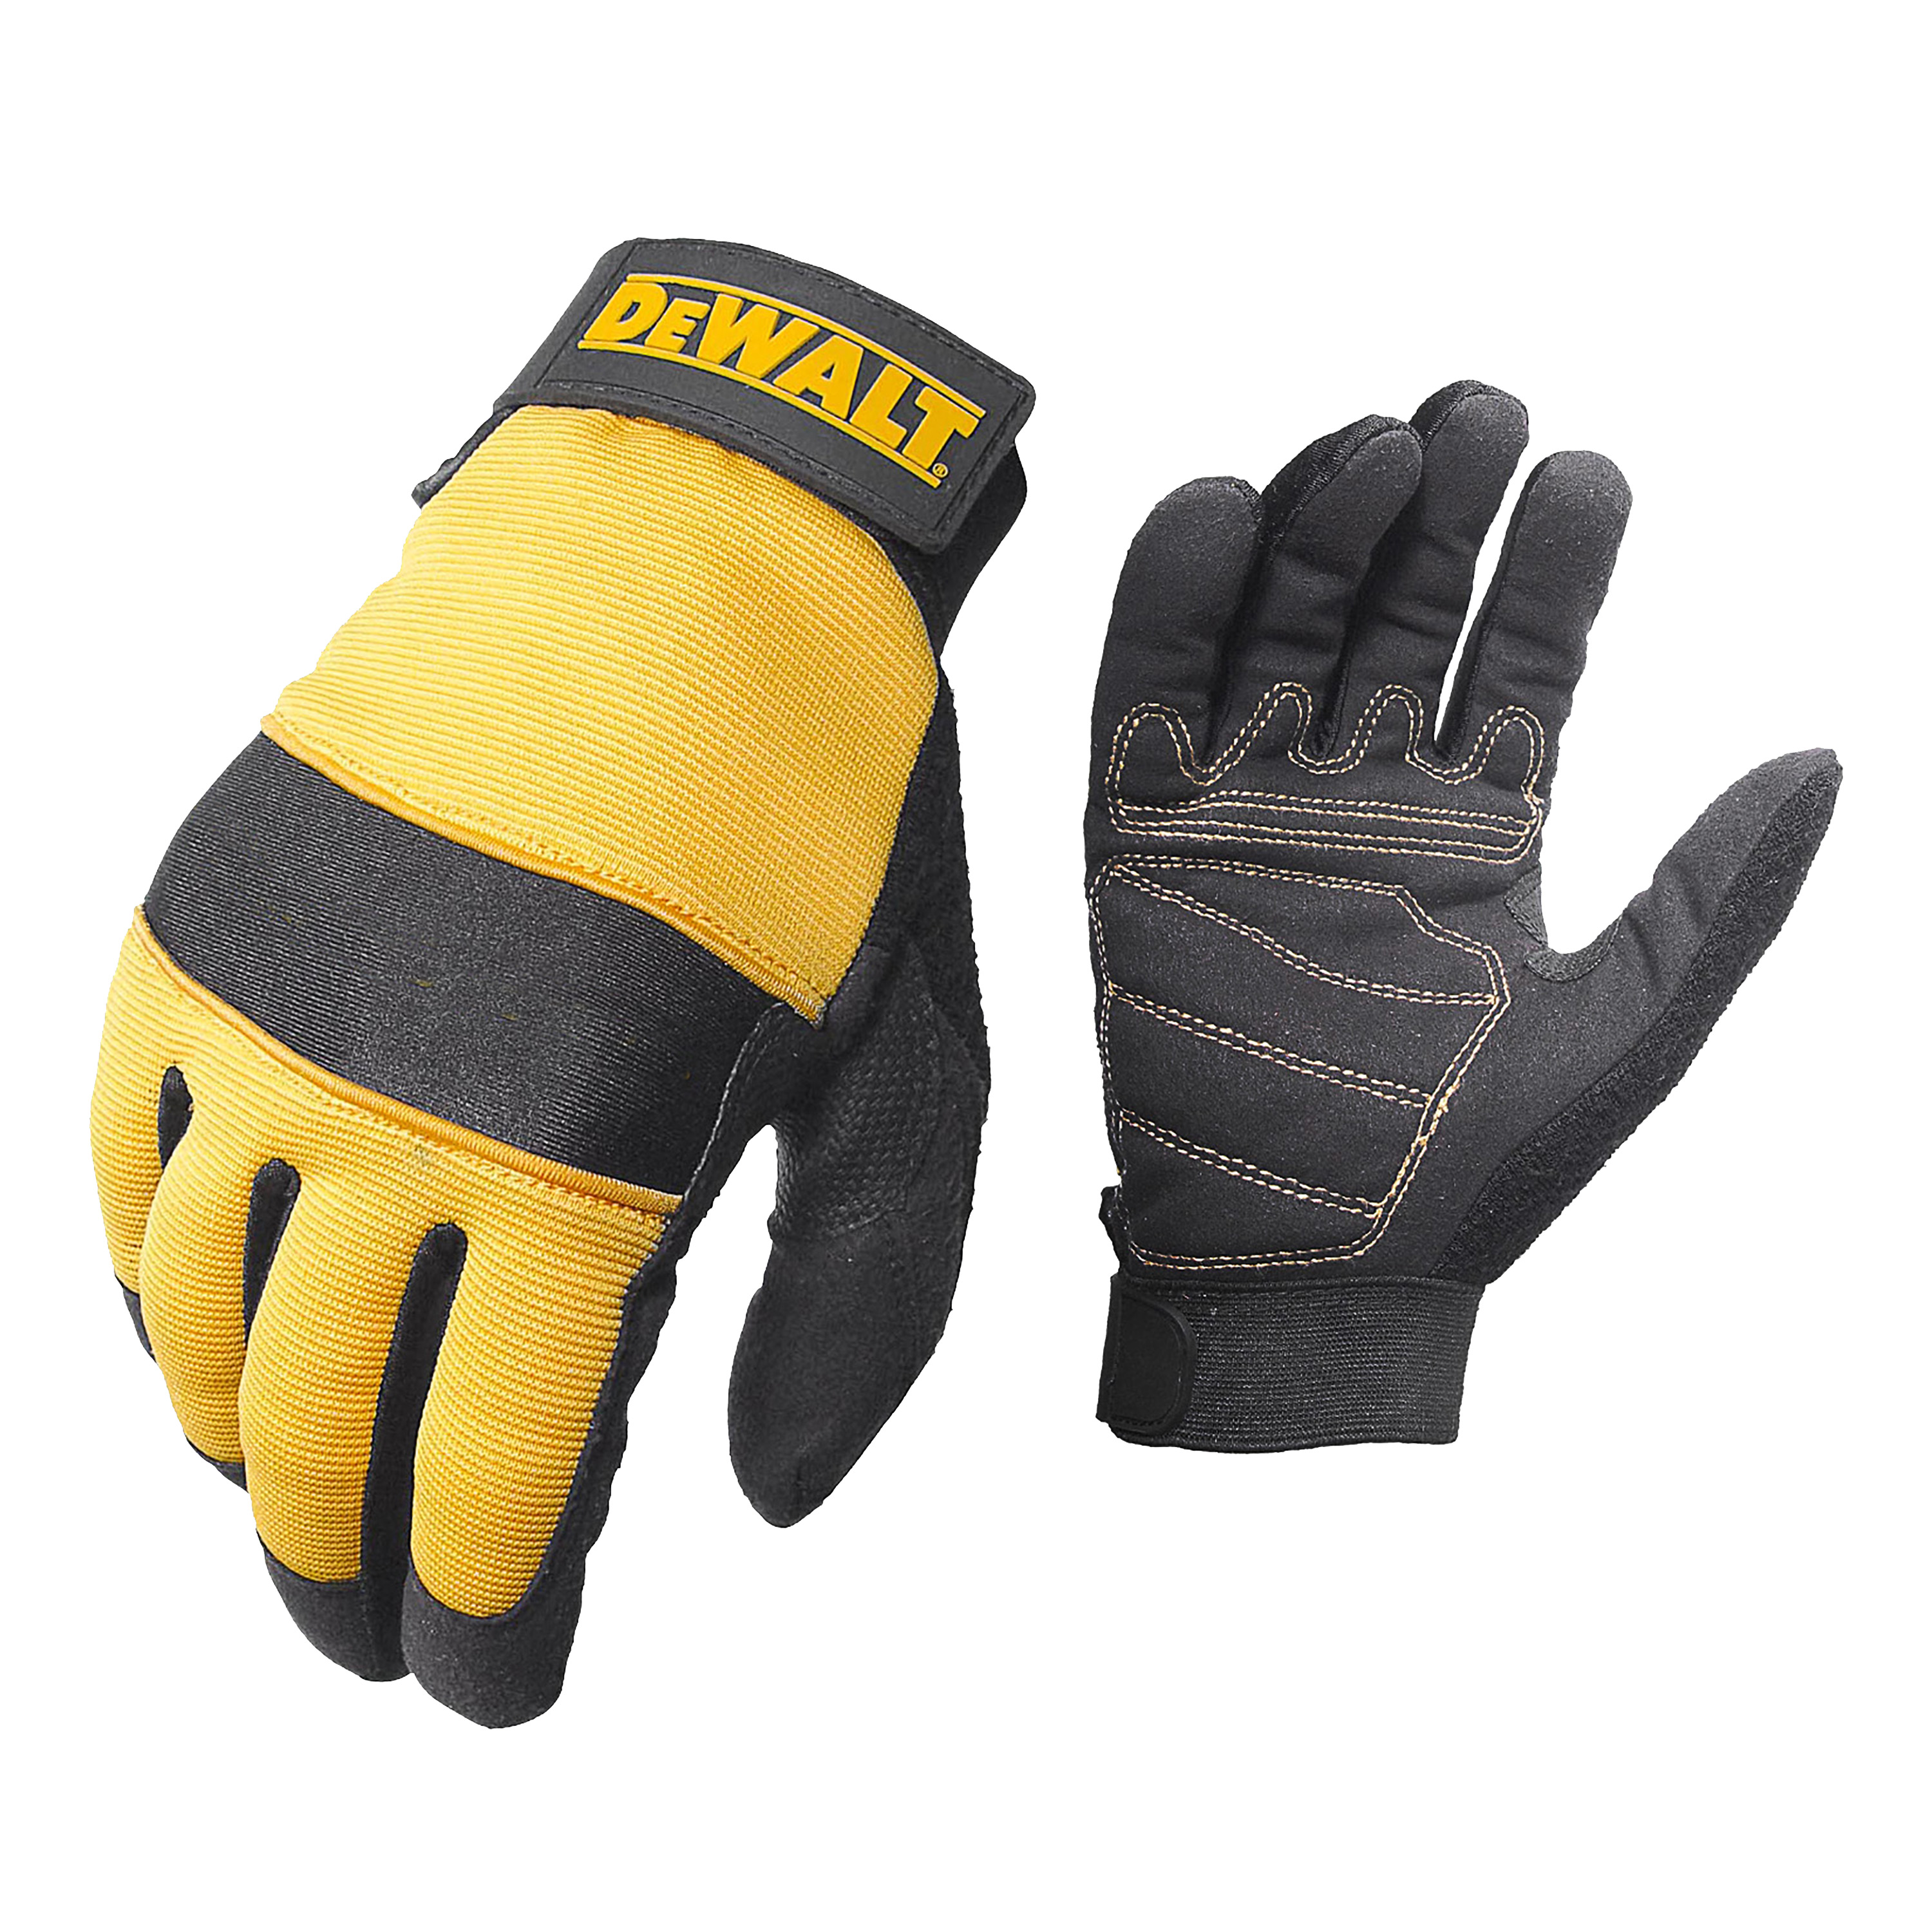 DPG20 All Purpose Synthetic Leather Glove - Size L - Leather